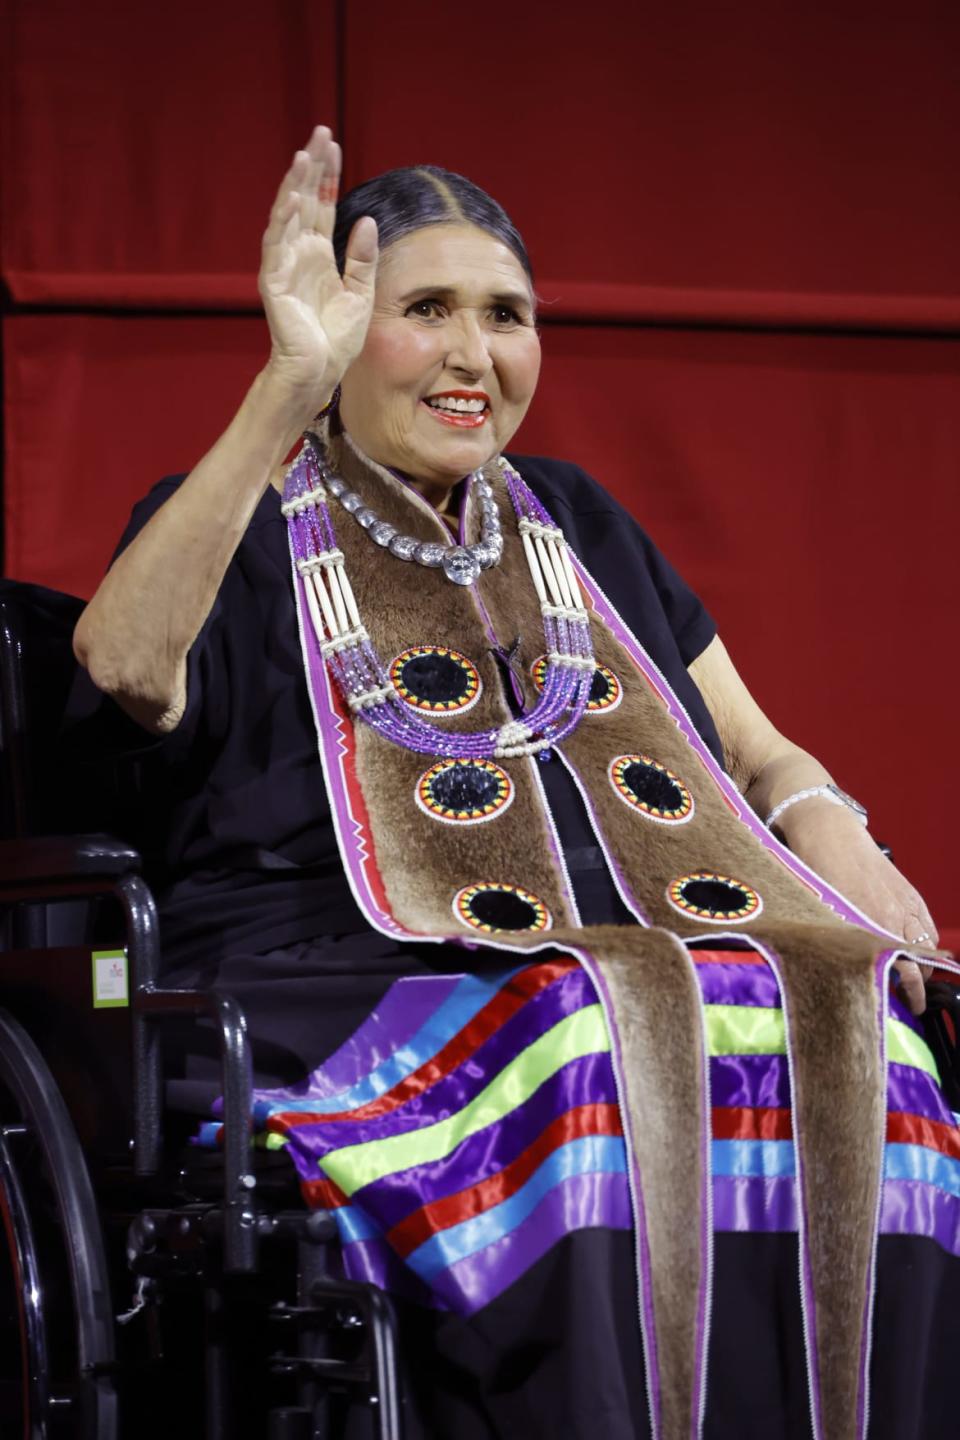 <div class="inline-image__caption"><p>Sacheen Littlefeather on stage at AMPAS Presents An Evening with Sacheen Littlefeather at Academy Museum of Motion Pictures on Sept. 17, 2022, in Los Angeles, California. </p></div> <div class="inline-image__credit">Frazer Harrison/Getty Images</div>